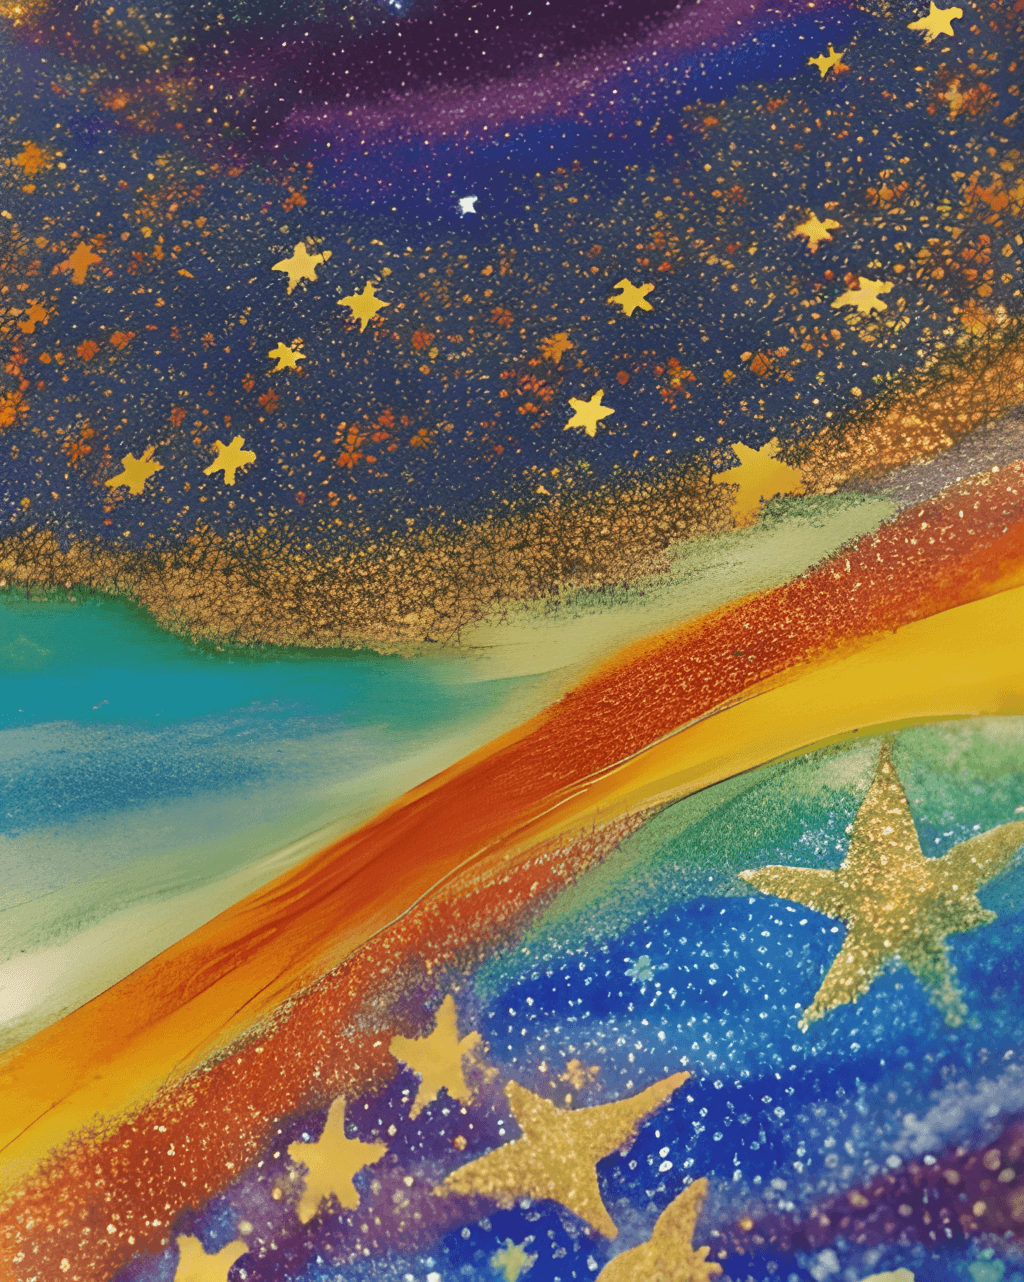 The Little Prince Insanely Detailed Rainbow Hanging in Space · Creative ...